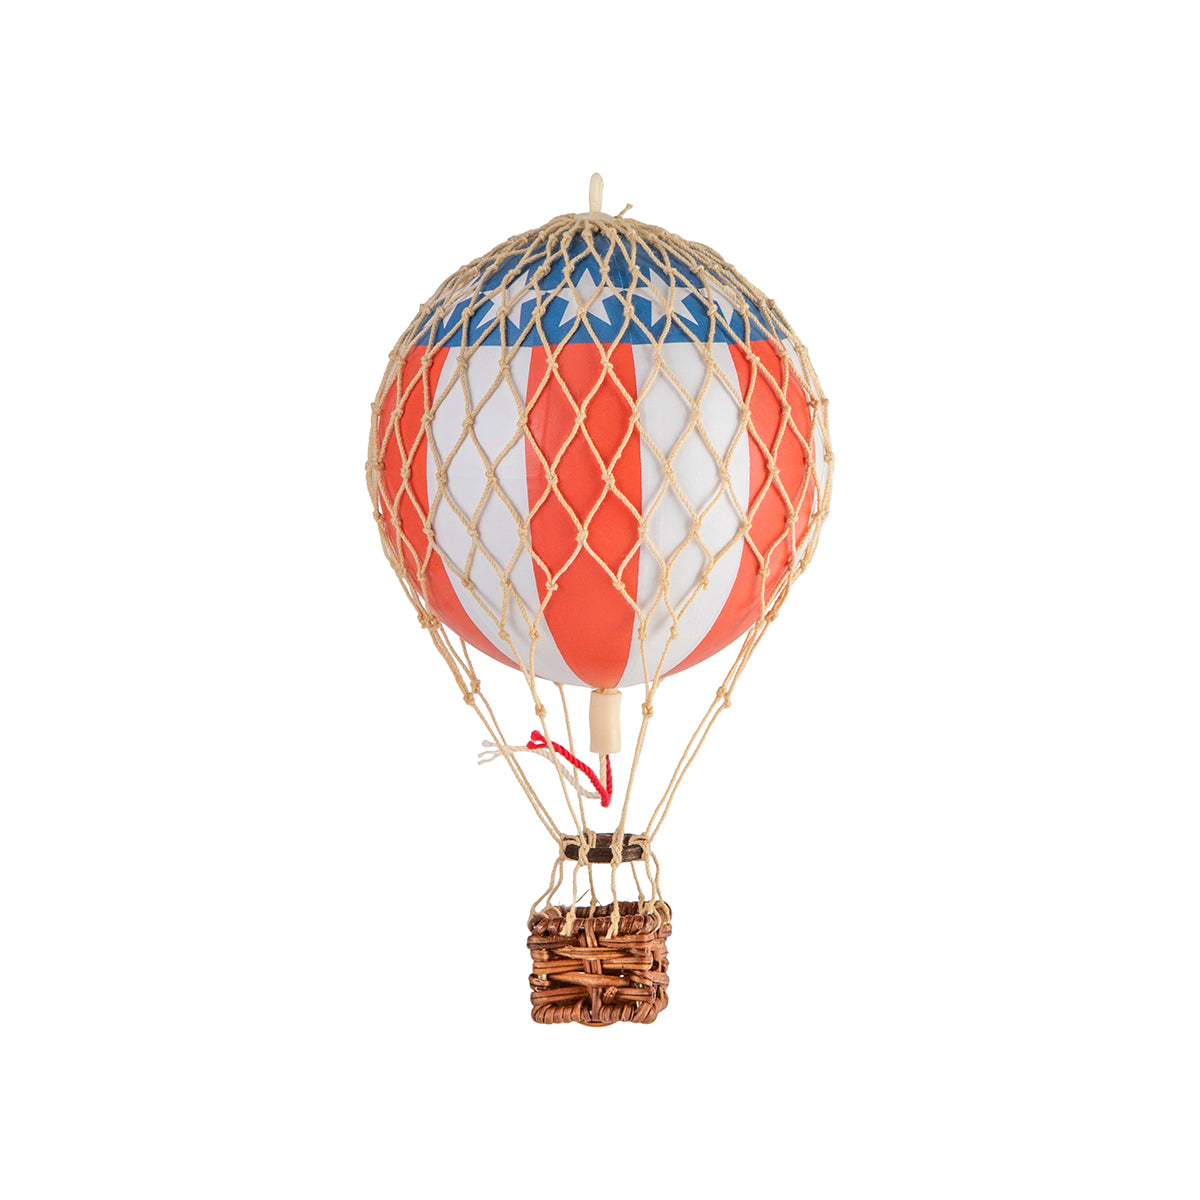 A whimsical journey with a Wonderen Extra Small Hot Air Balloon - Floating The Skies by Wonderen Stroopwafels on a white background.